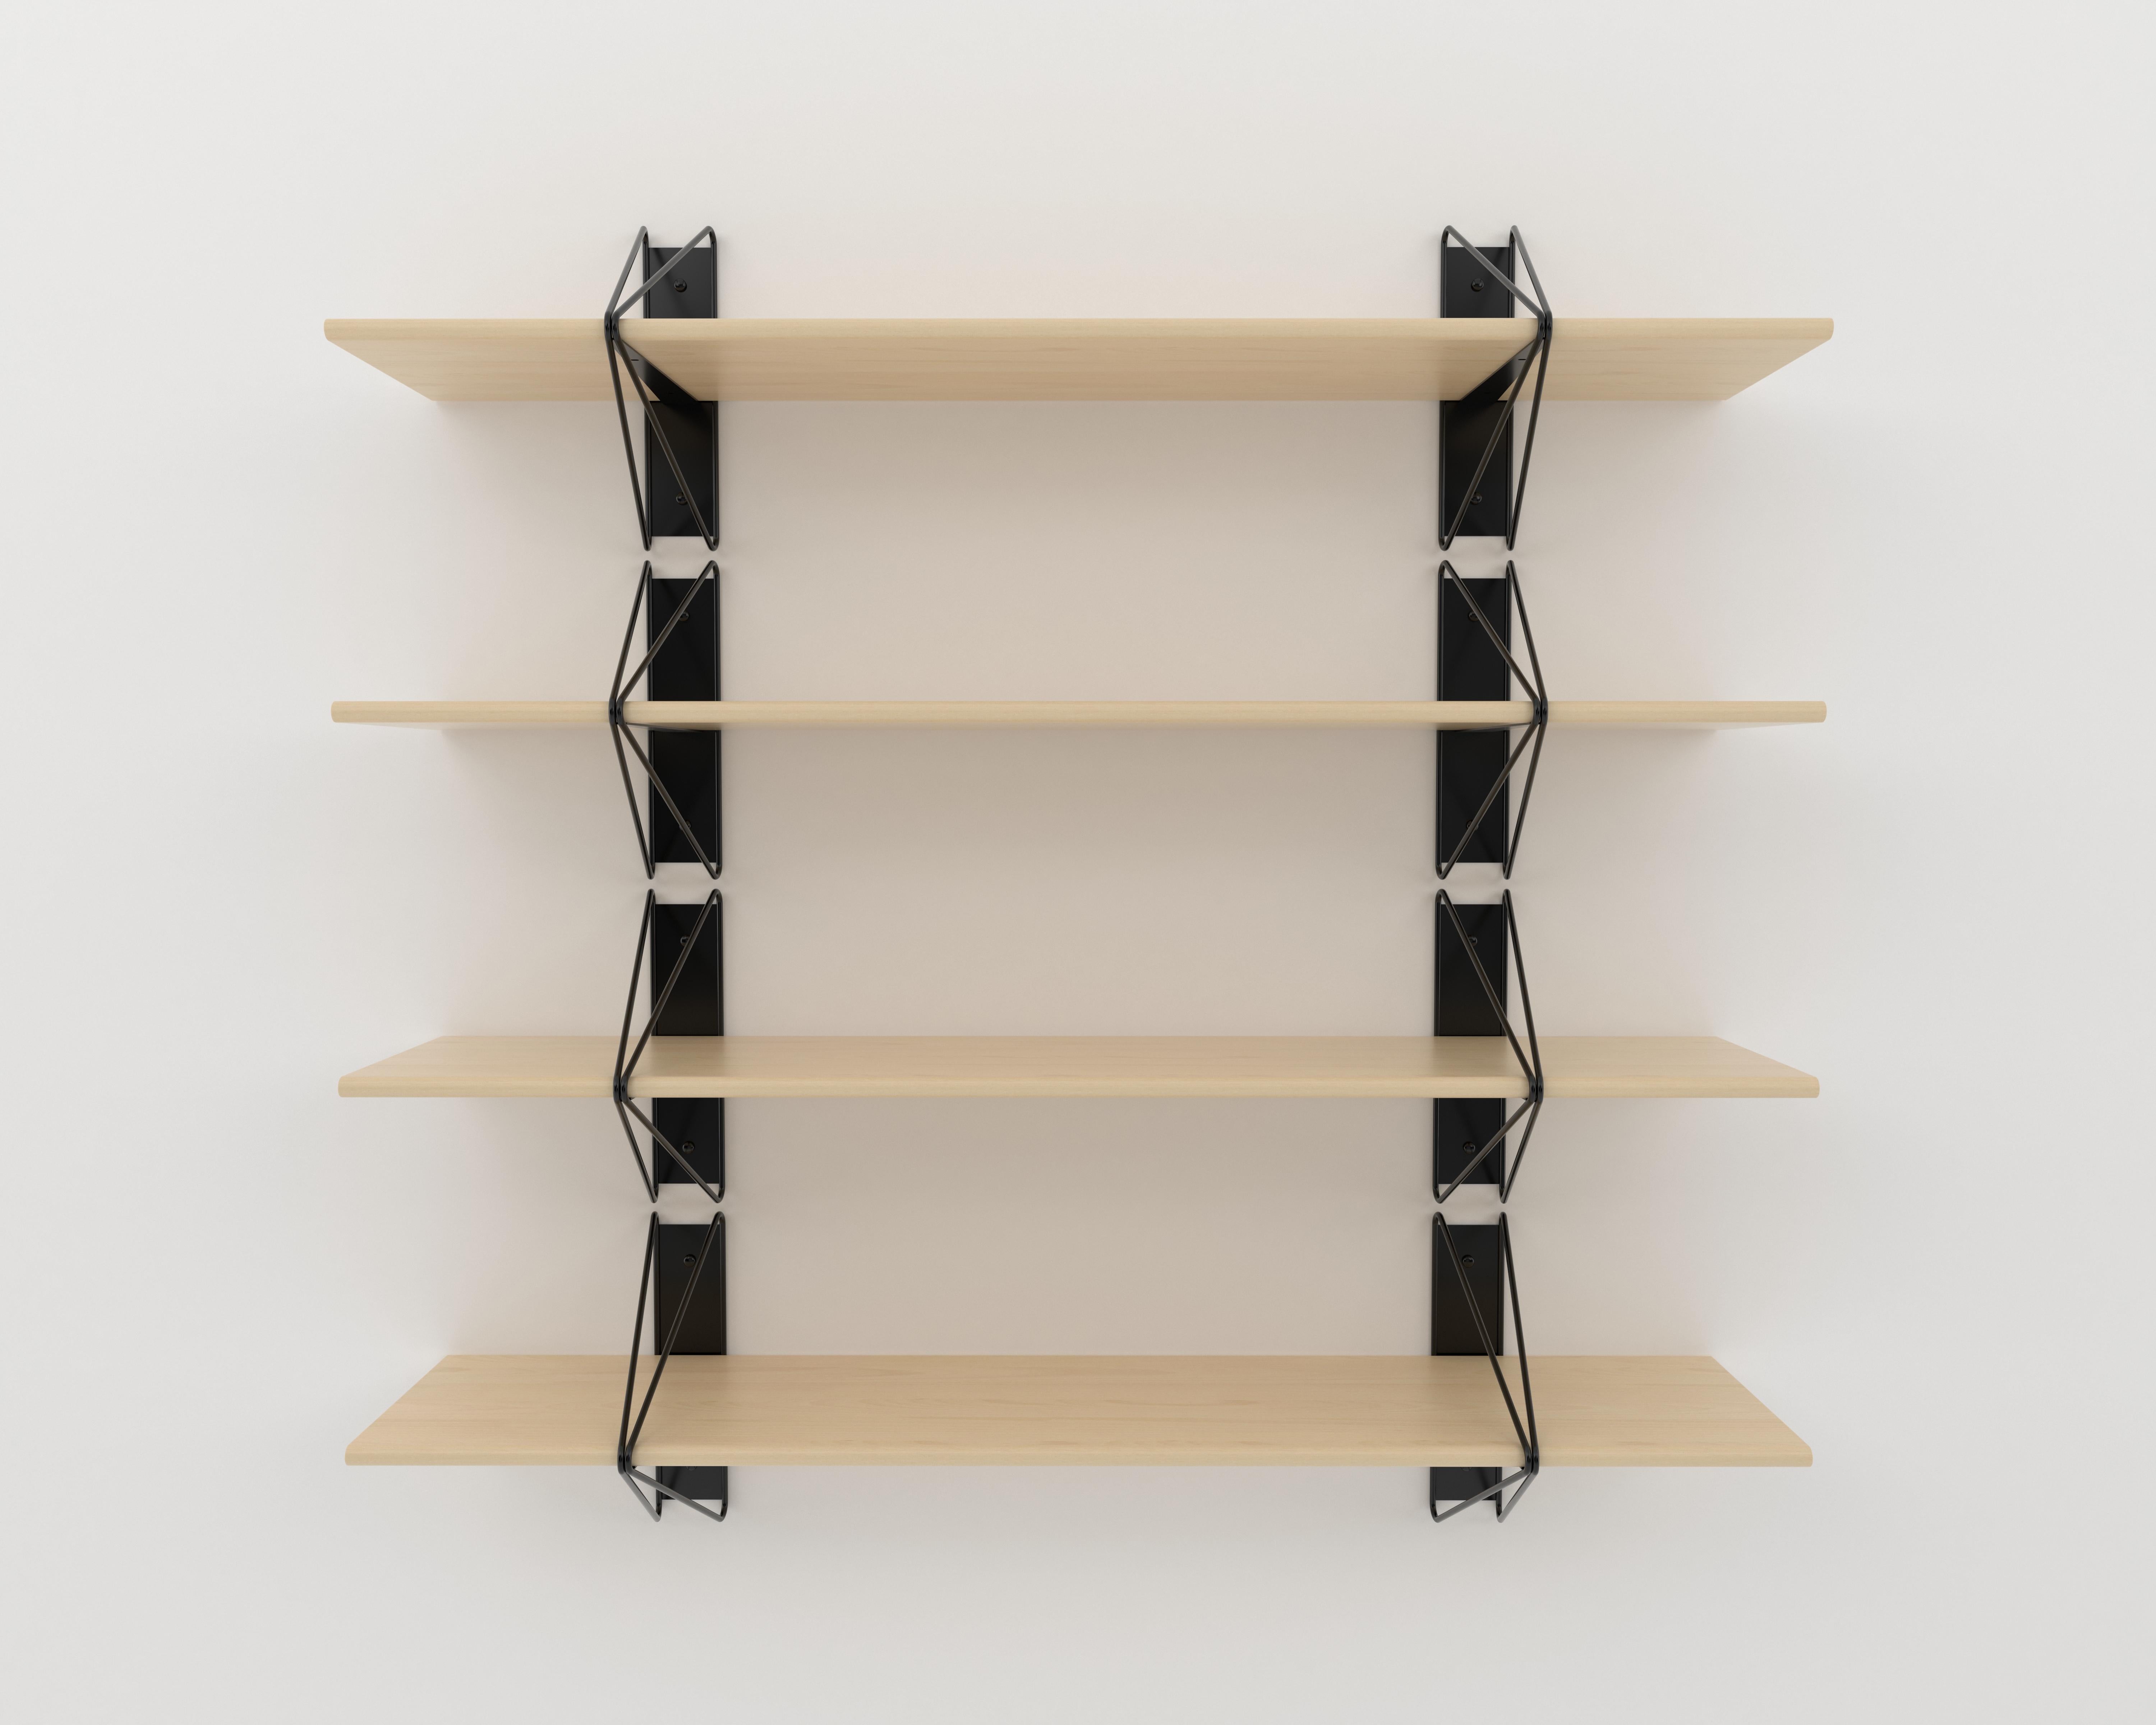 Powder-Coated Set of 4 Strut Shelves from Souda, Black and Maple, Made to Order For Sale